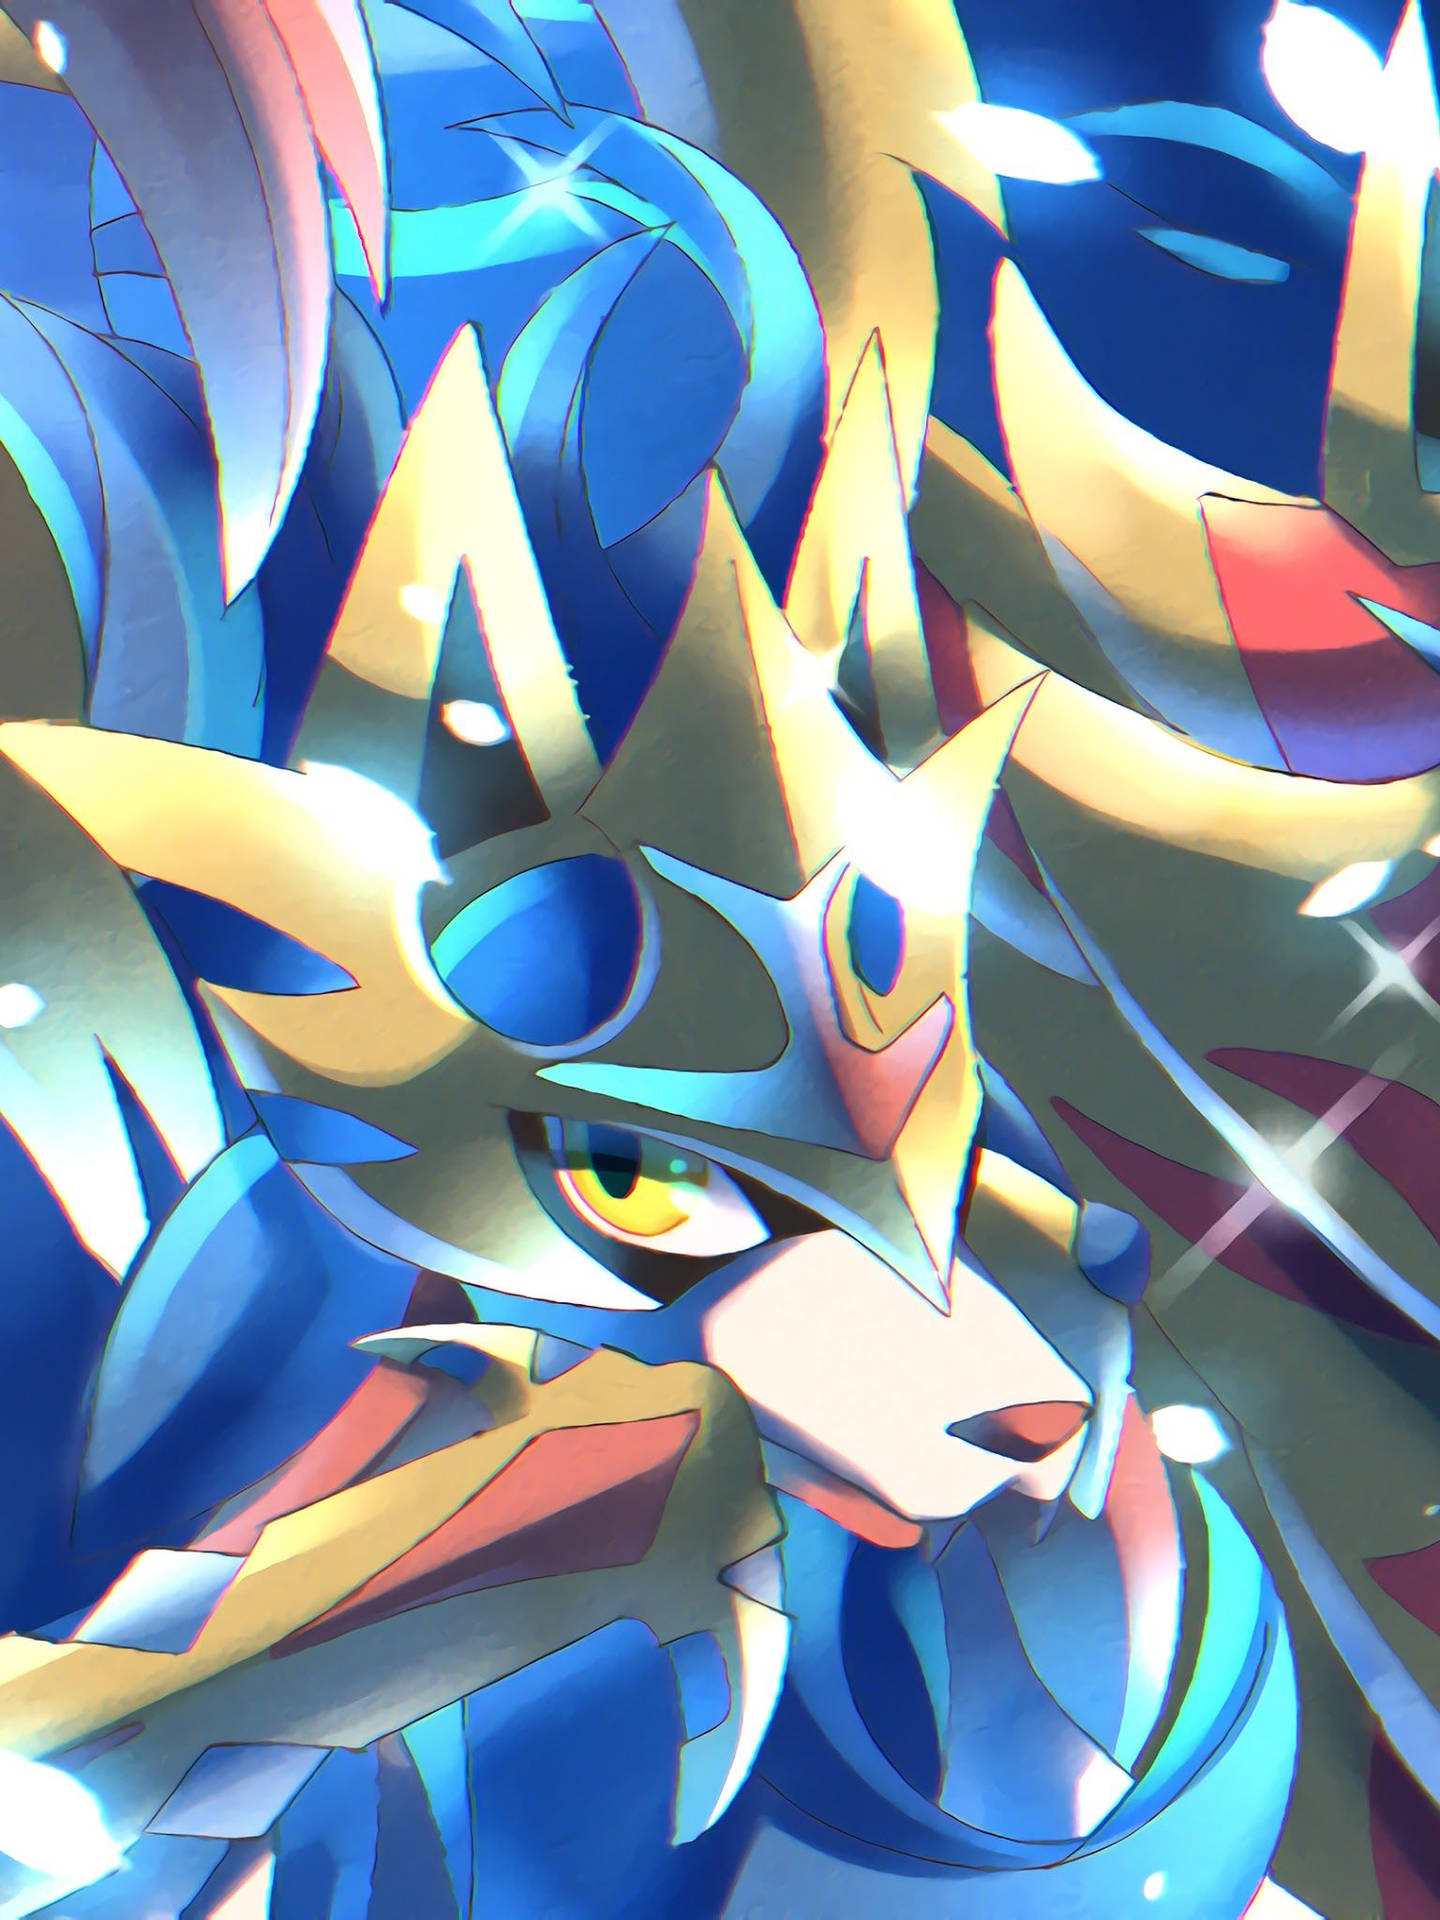 Zacian (Pokémon) HD Wallpapers and Backgrounds